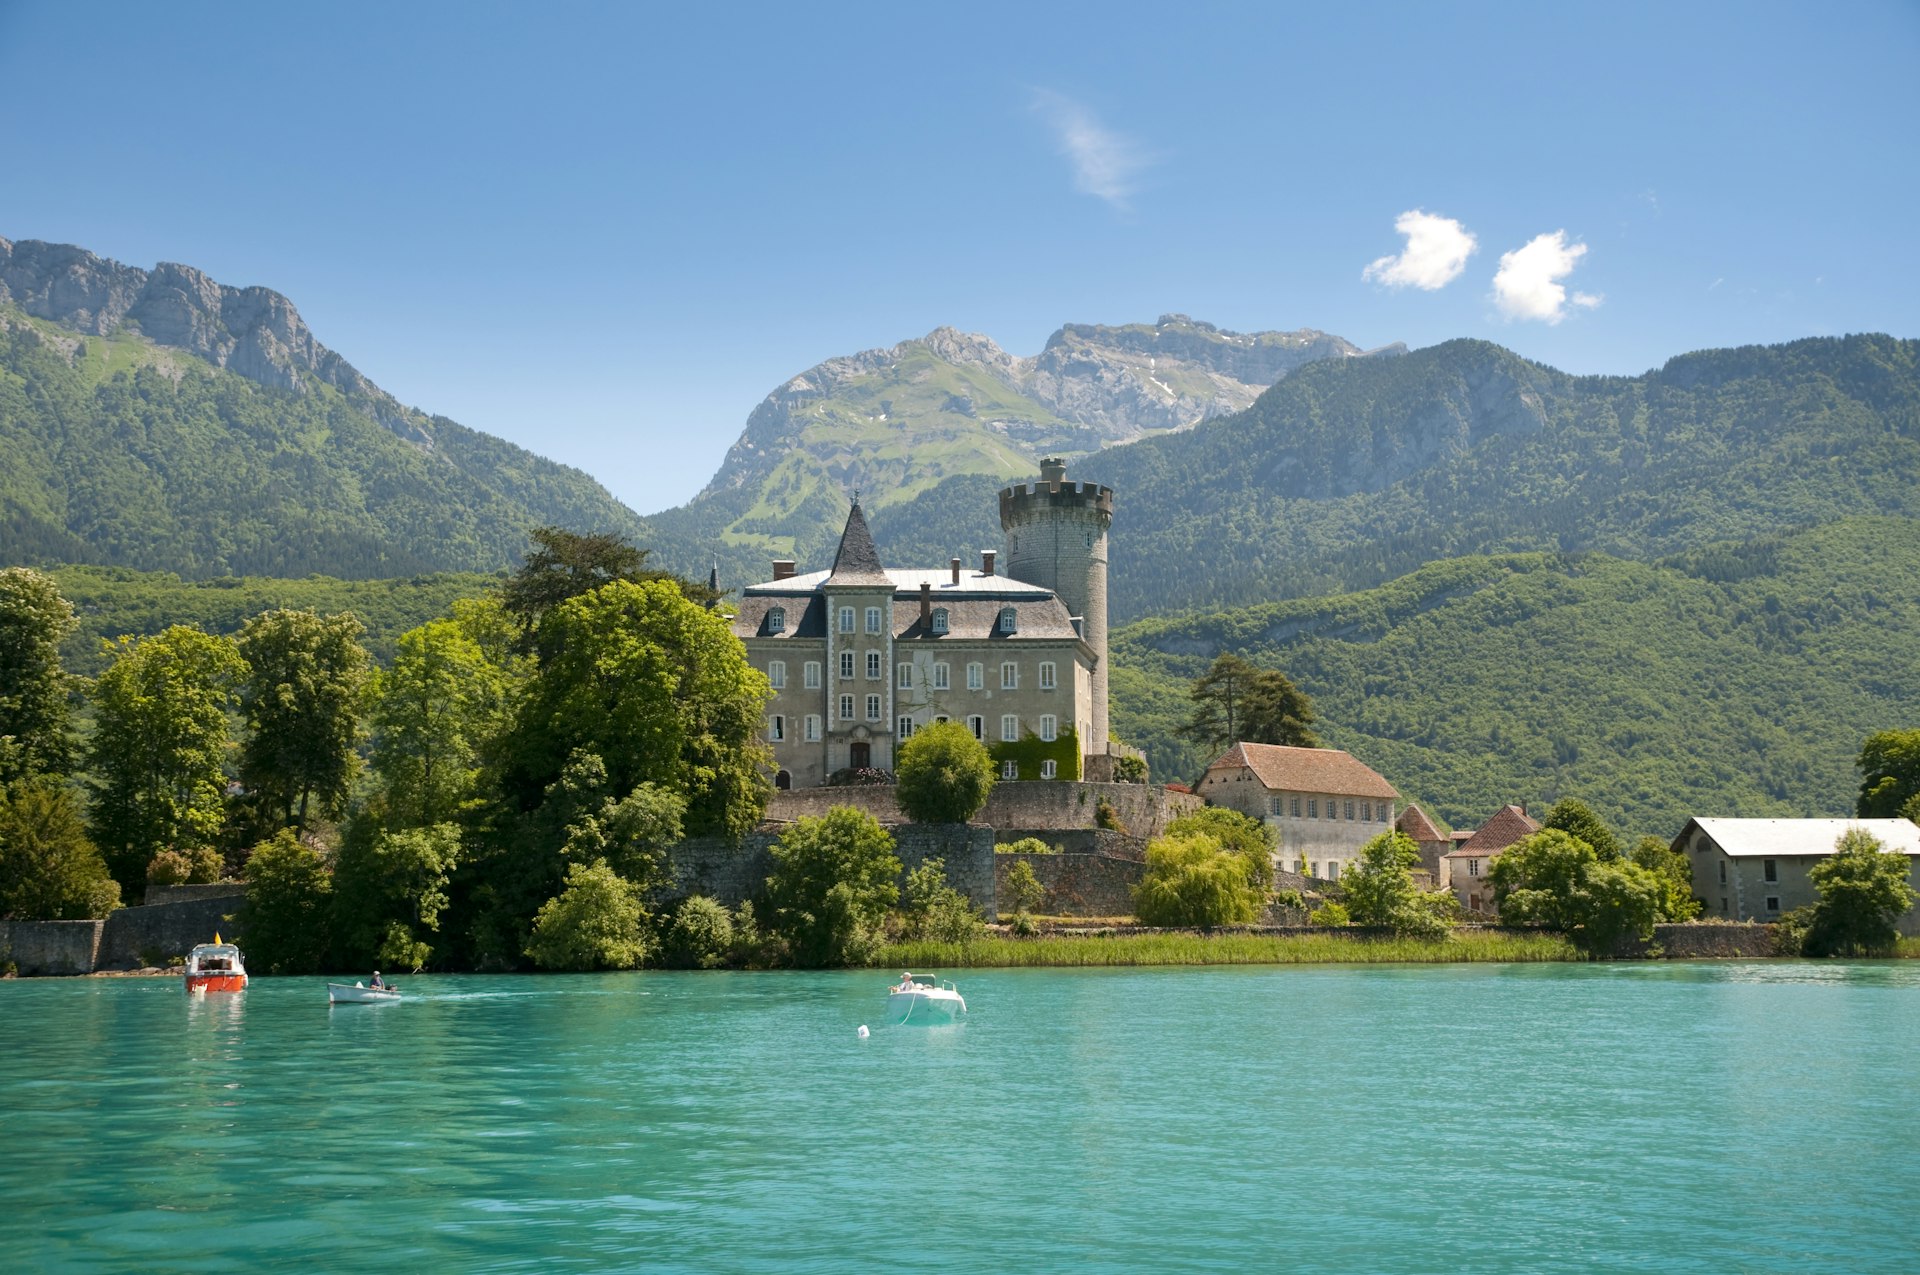 The Alpine Château d'Annecy overlooks a clear blue lake with the French Alps in the background